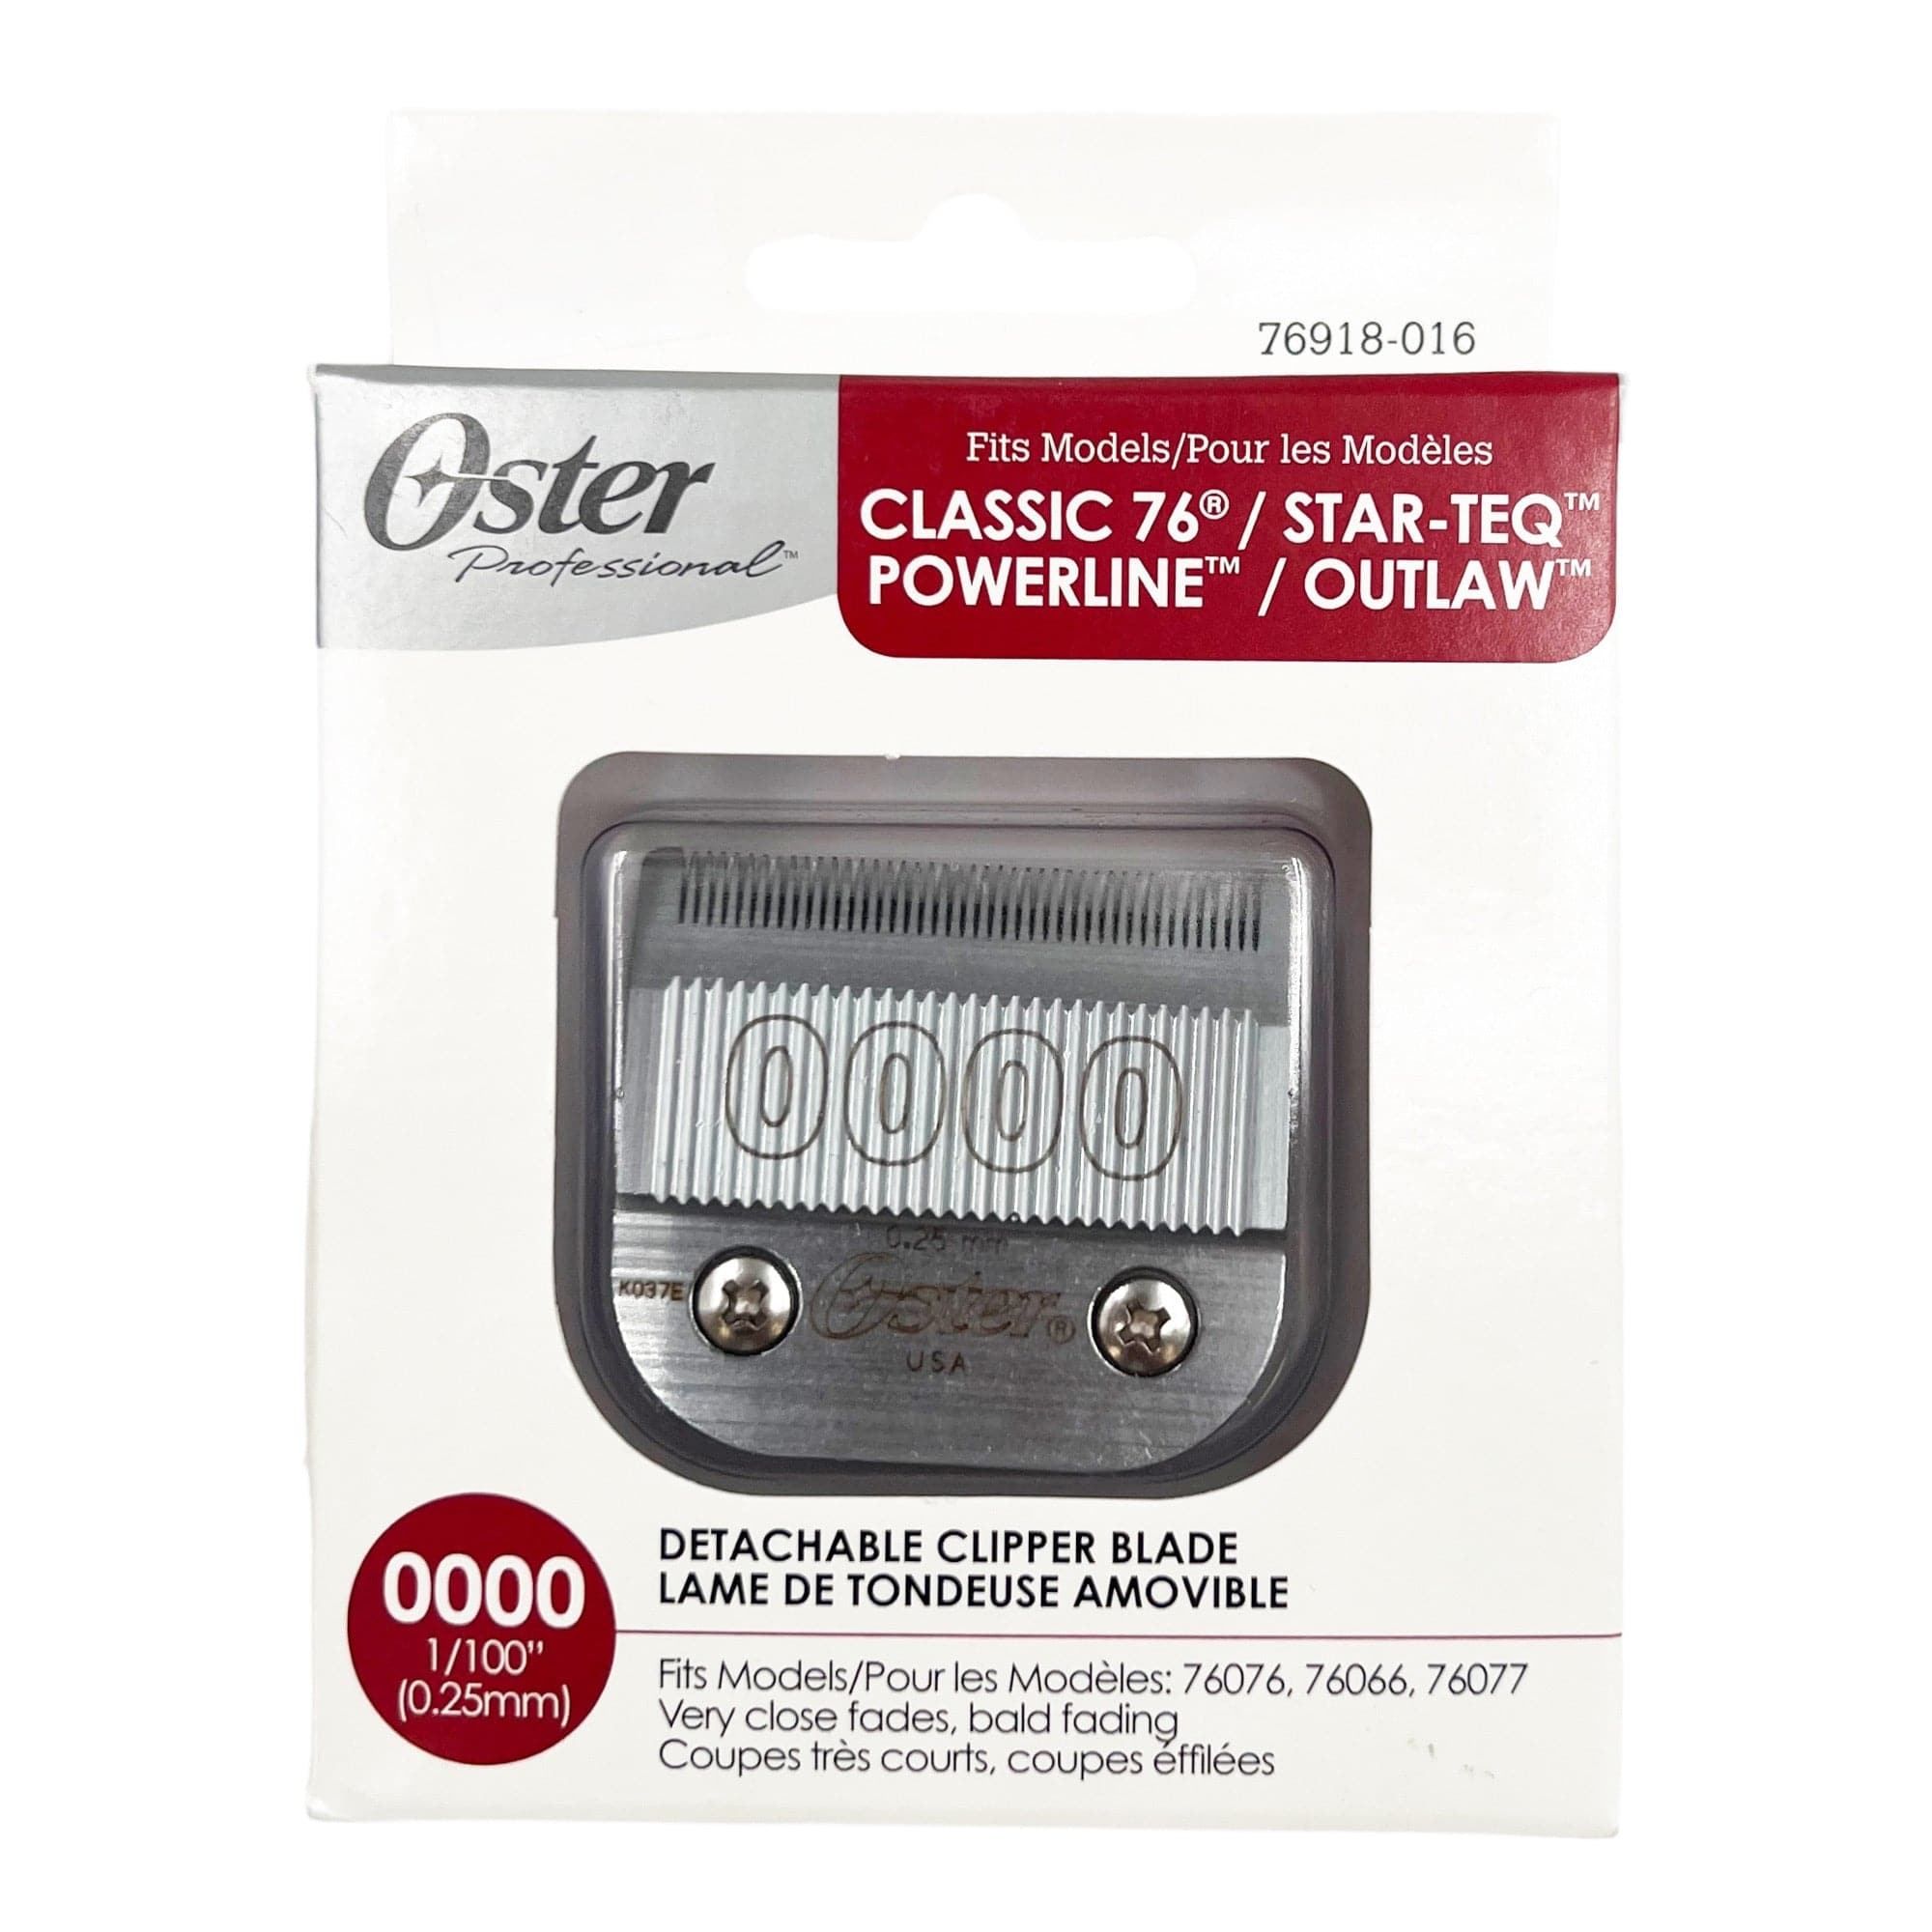 Oster - Detachable Blade Size 0000 - 0.25mm 076918-016